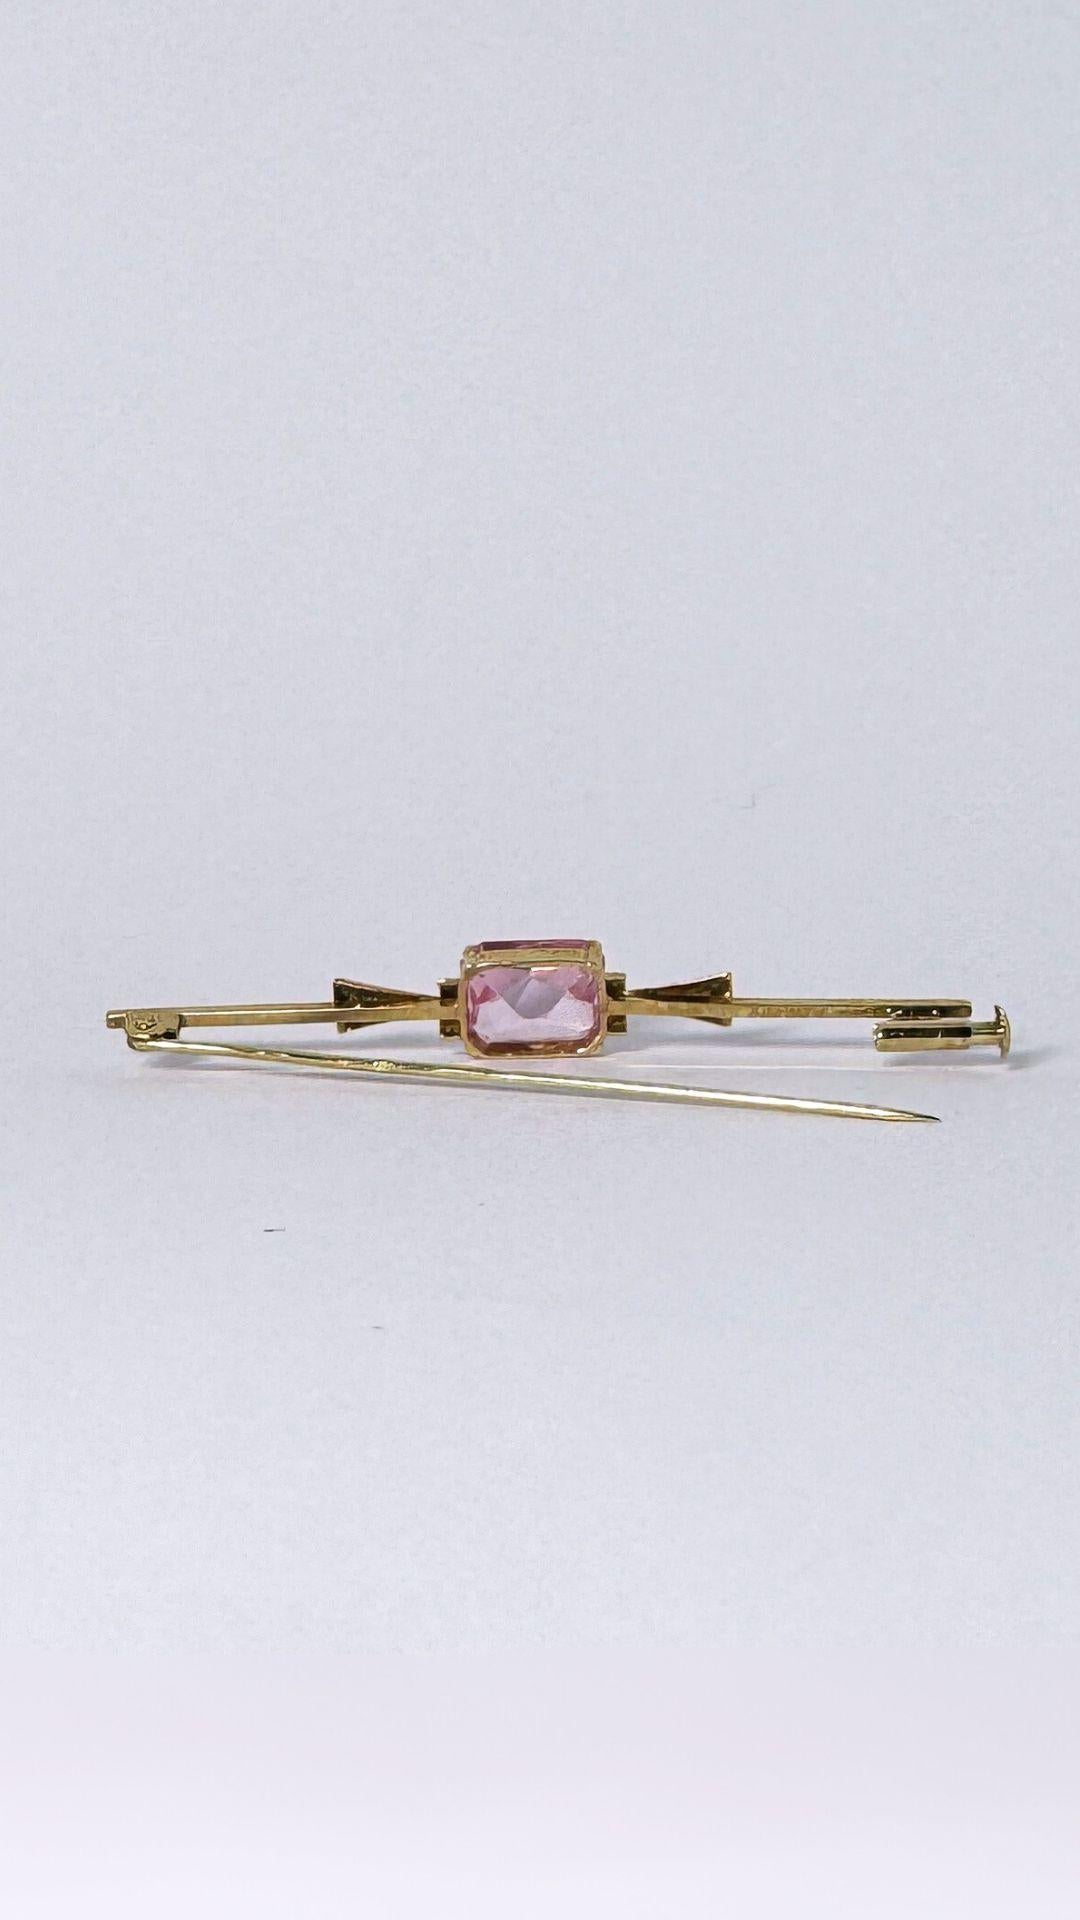 Art Deco Vintage European pin, 14 carat yellow gold, with amethyst, rose de france For Sale